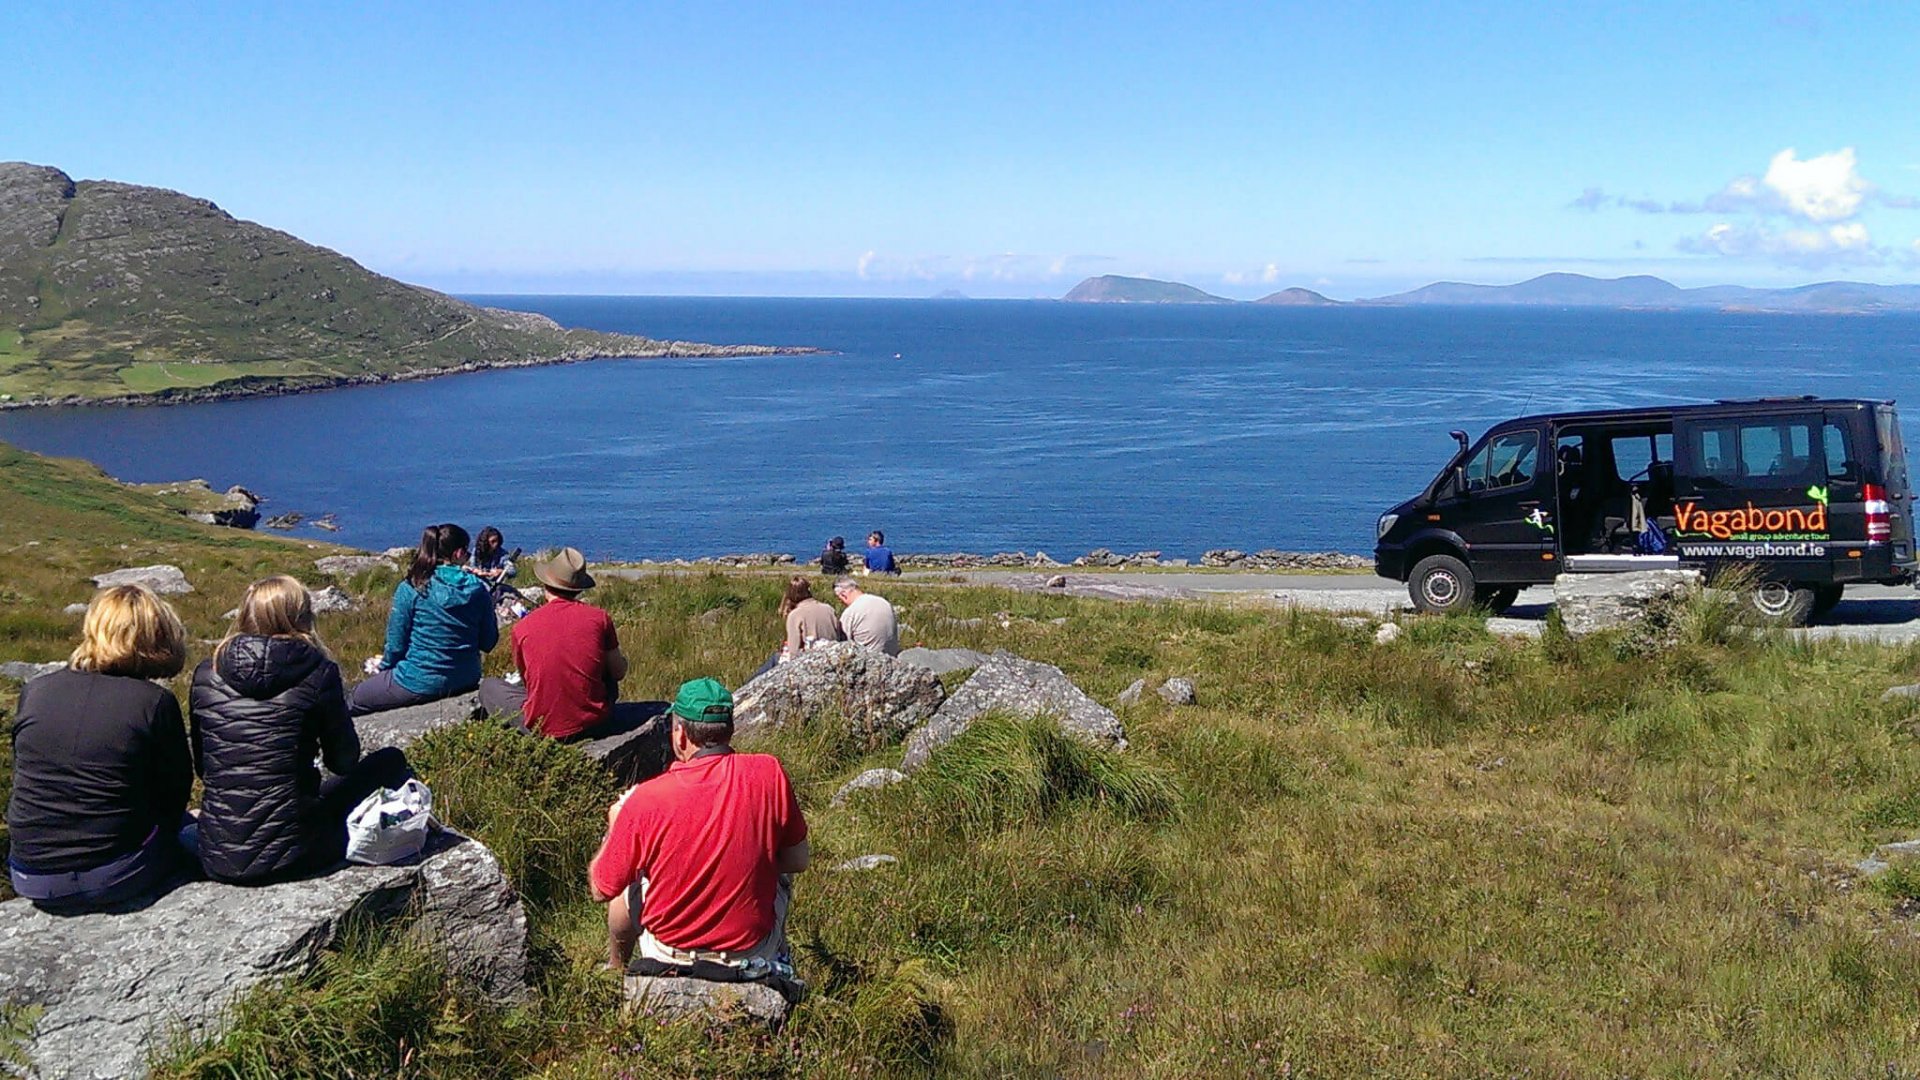 Tour group enjoying a picnic in a scenic location in Ireland